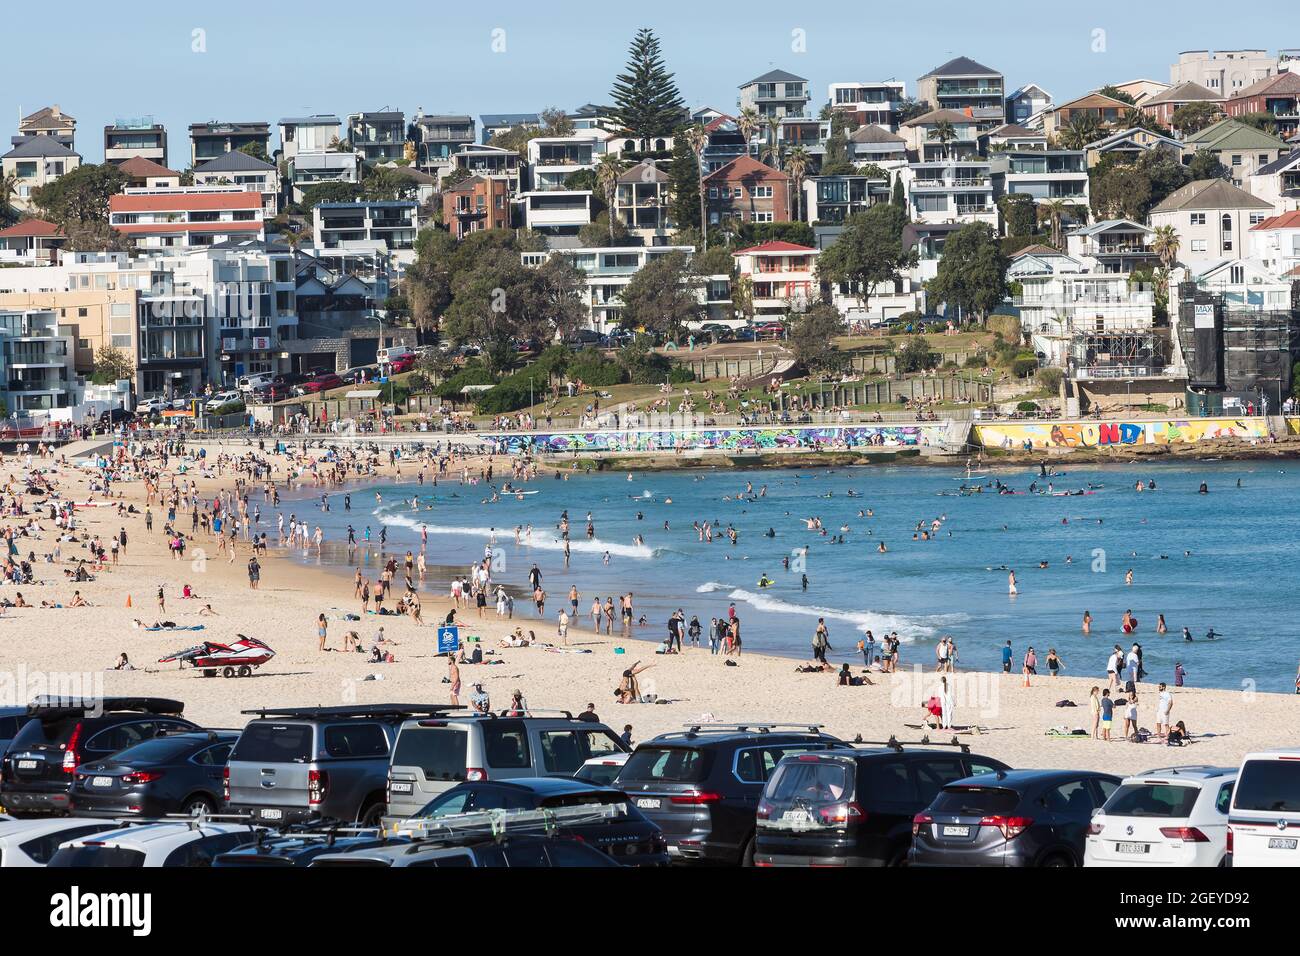 Sydney, Australia. Sunday 22nd August 2021. General views of people relaxing on Bondi Beach as winter temperatures reach 25 degrees centigrade. The Sydney Lockdown has been extended across greater Sydney until September 30th as COVID-19 Delta Strain case numbers continue to rise. Face masks are now compulsory outdoors across NSW unless exercising. Credit: Paul Lovelace/Alamy Live News Stock Photo